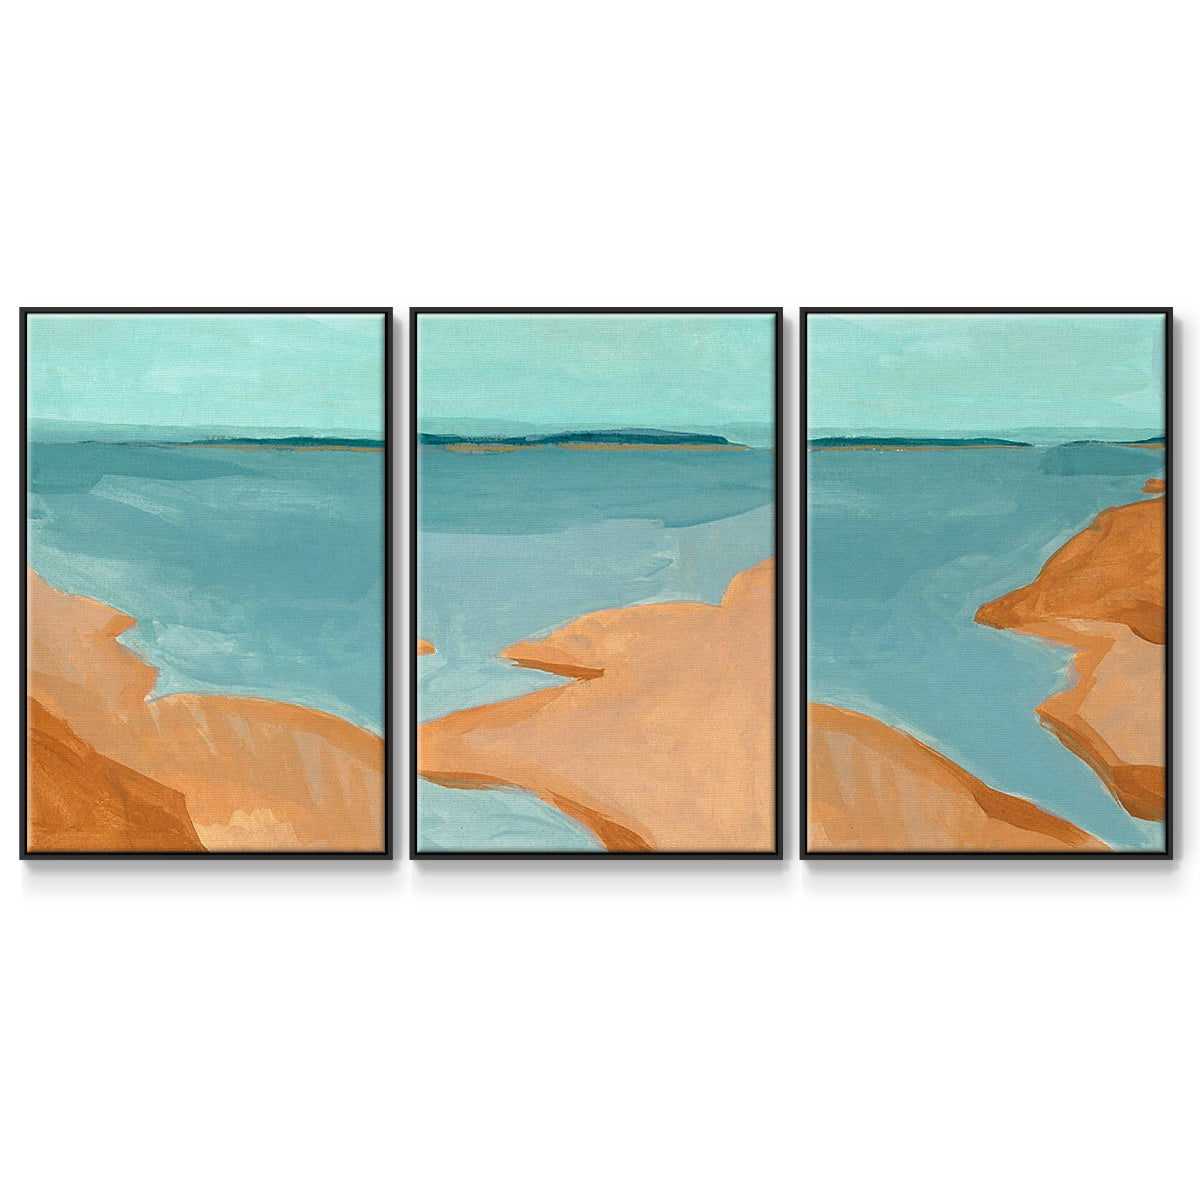 Ornamental Safari Animals I - Framed Premium Gallery Wrapped Canvas L Frame 3 Piece Set - Ready to Hang